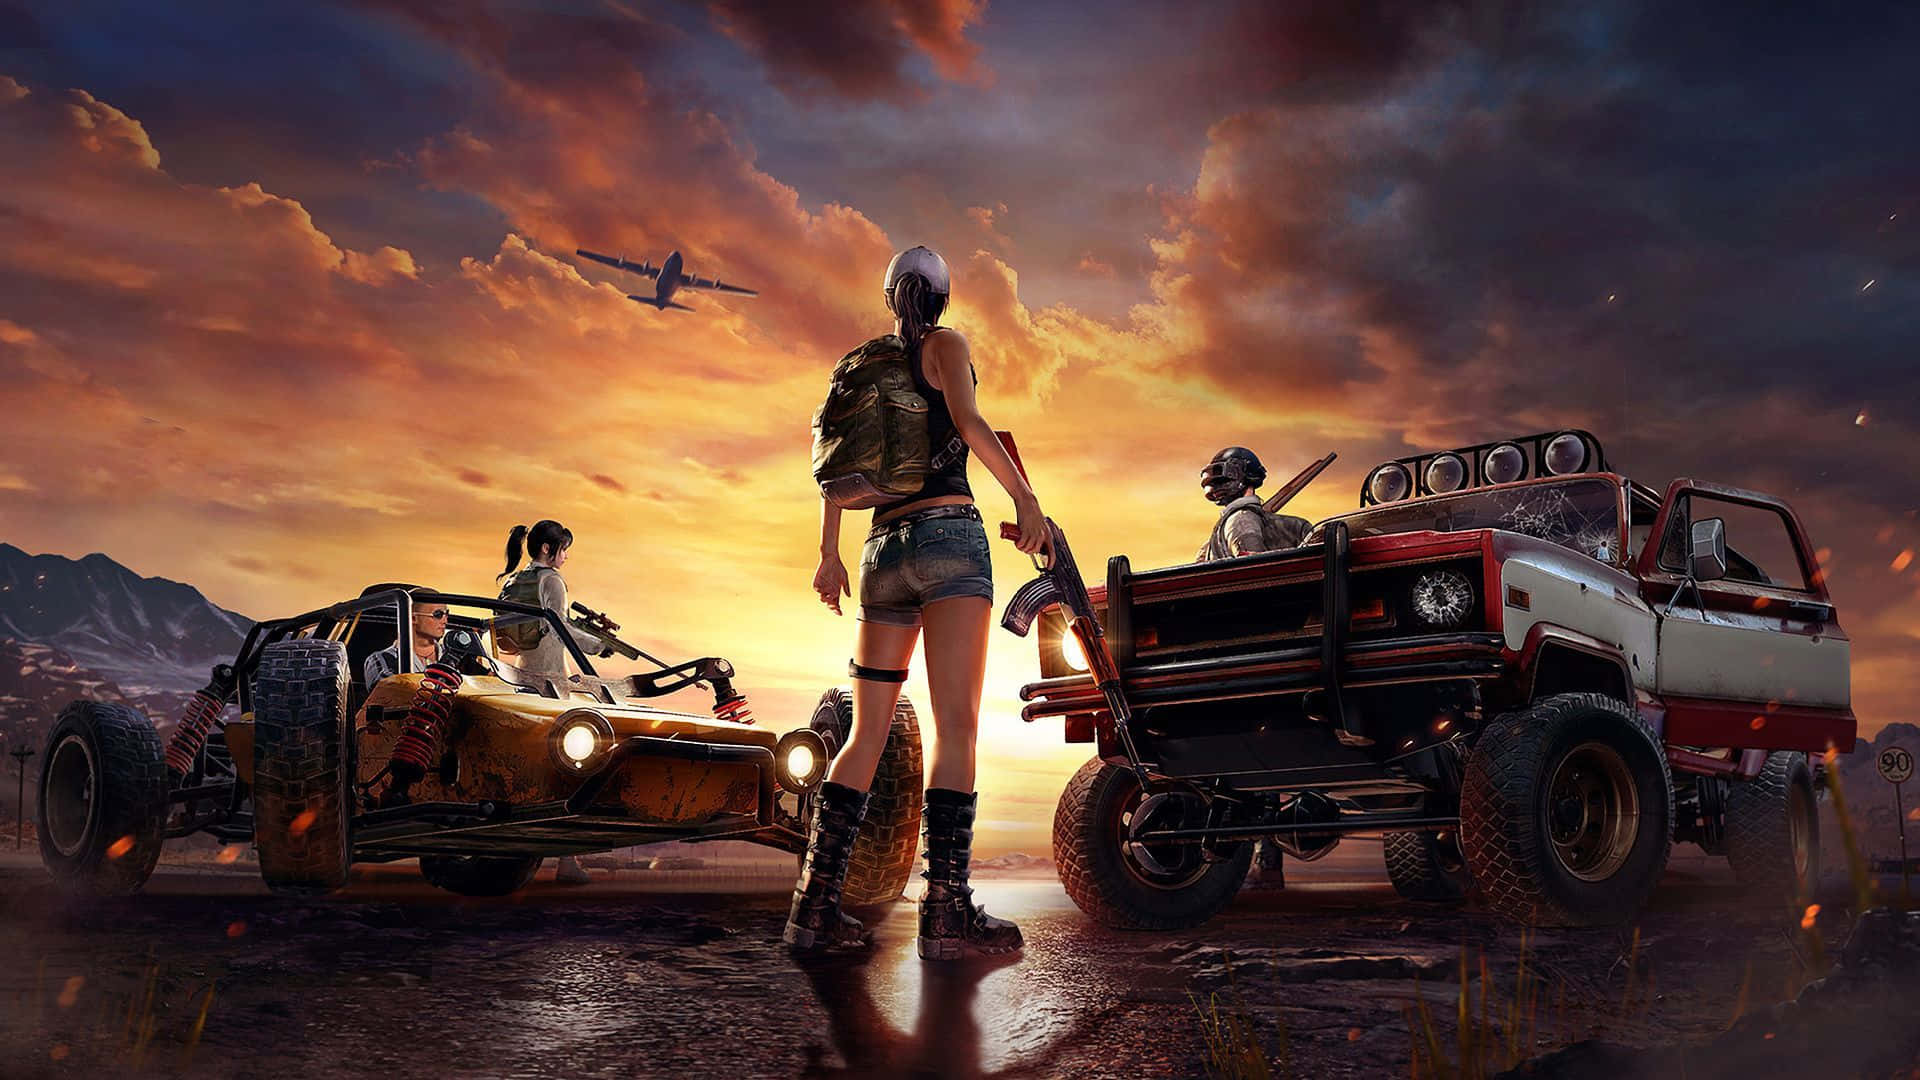 Fly ved solnedgang PUBG 1920x1080 Wallpaper